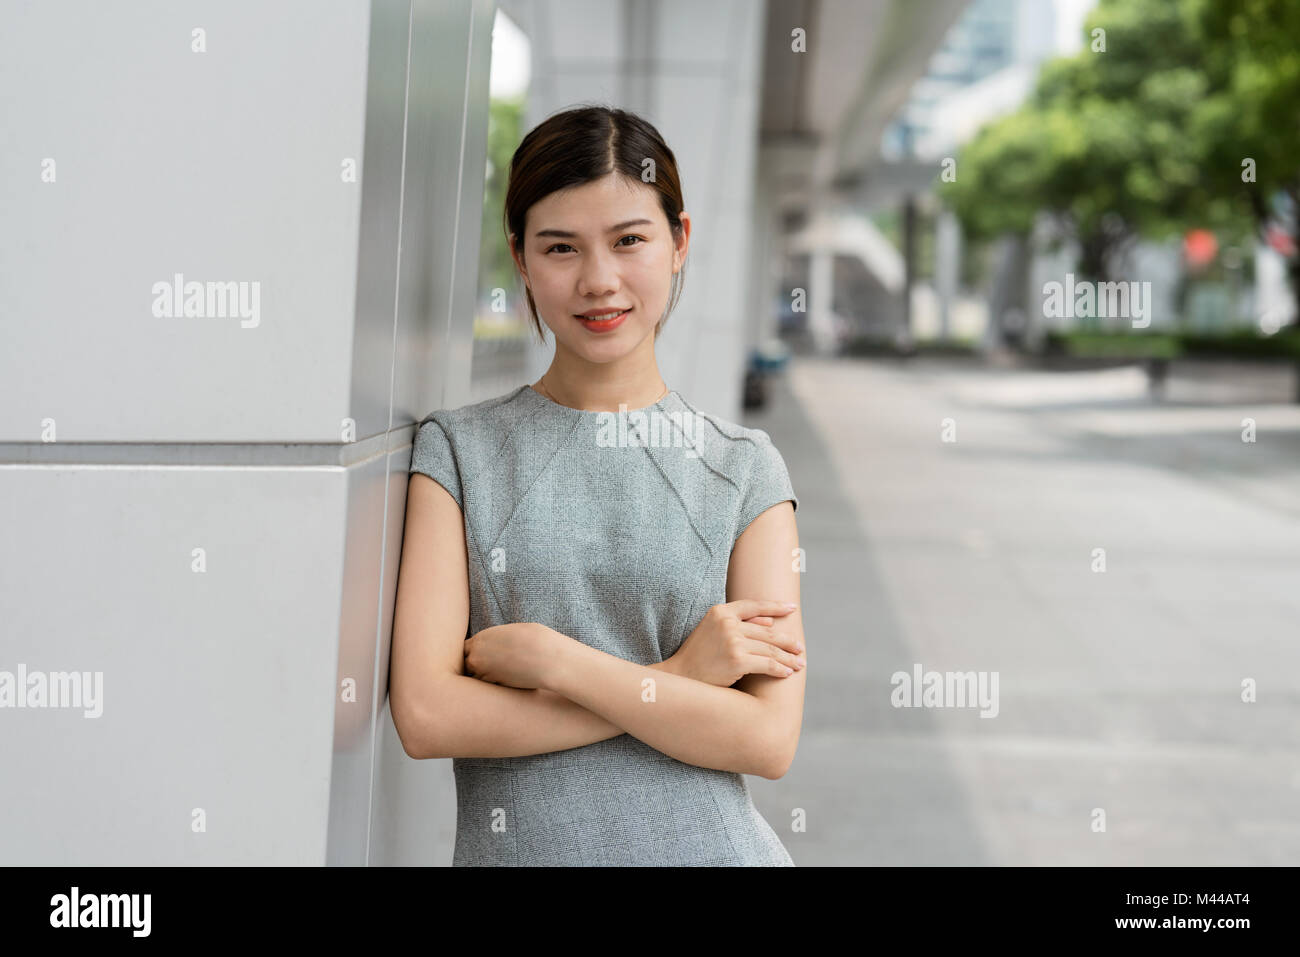 Portrait of young businesswoman leaning against wall in city, Shanghai, China Stock Photo